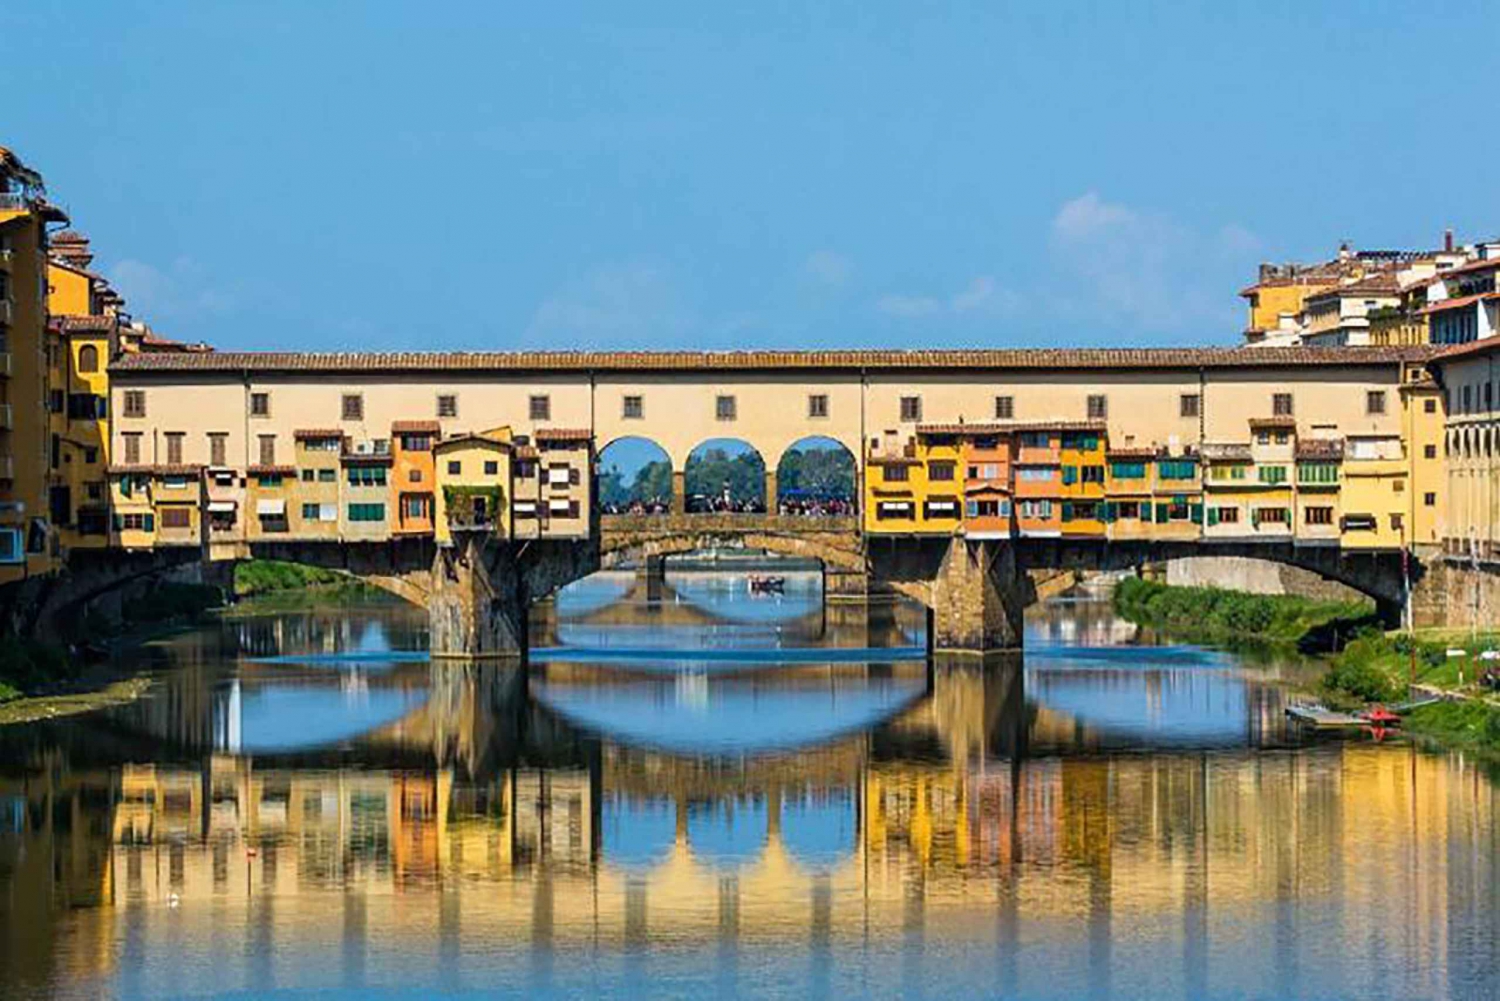 Florence: Best of Florence Tour with Michelangelo's David